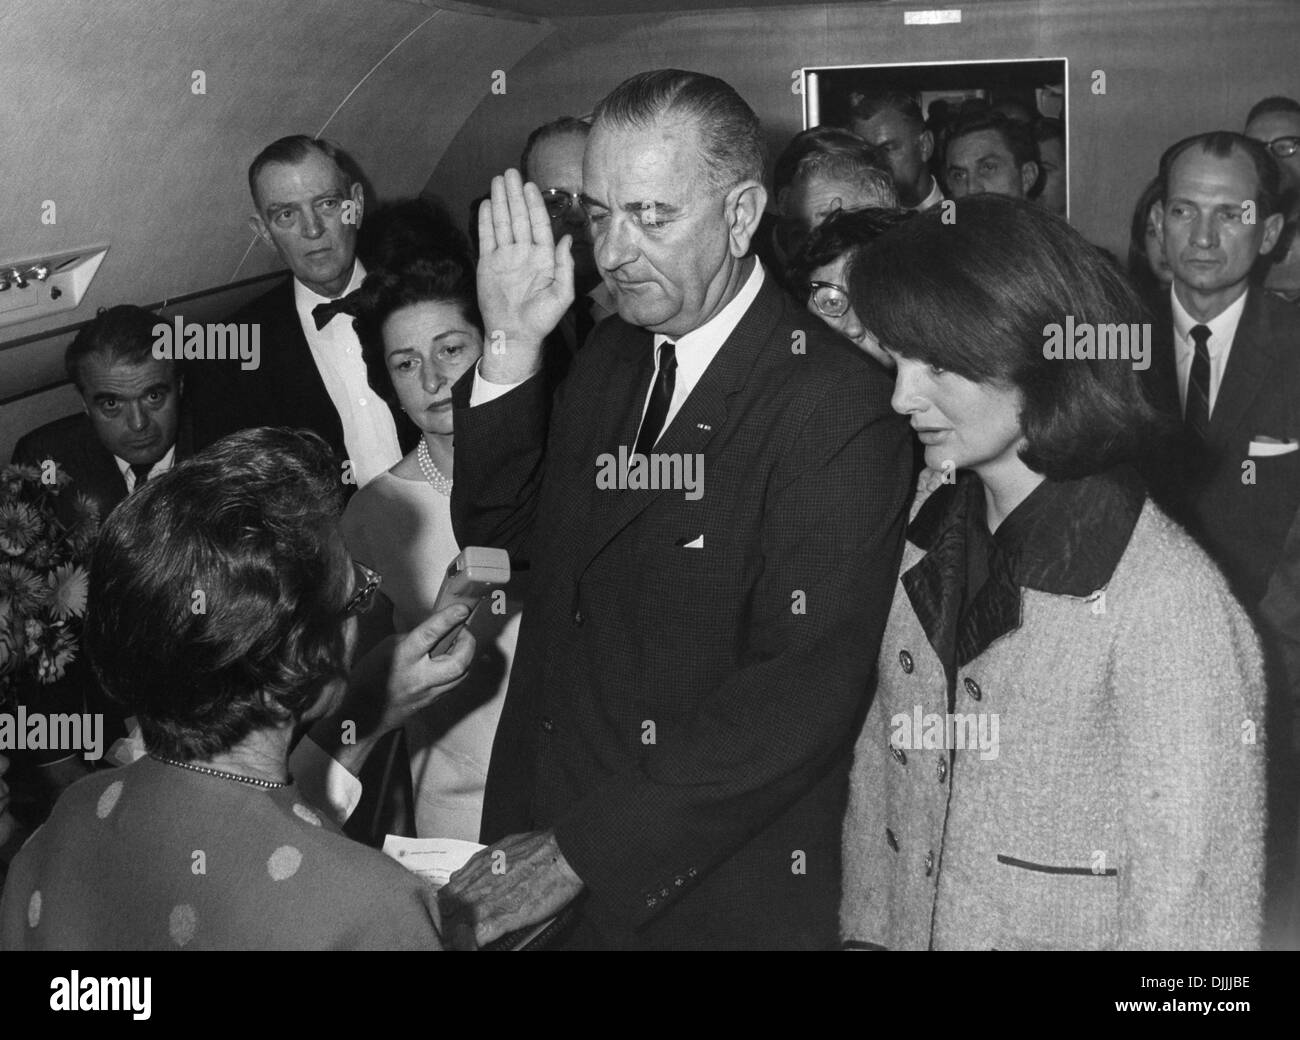 US Vice President Lyndon B. Johnson is sworn in as President by Judge Sarah Hughes following the death of John F. Kennedy onboard Air Force One November 22, 1963 in Dallas, Texas. Attending the event are L-R: Mac Kilduff (lower left corner), Jack Valenti, , Congressman Albert Thomas, Lady Bird Johnson, Chief Jessie Curry (behind LBJ's hand), Jacqueline Kennedy and Congressman Jack Brooks. Stock Photo